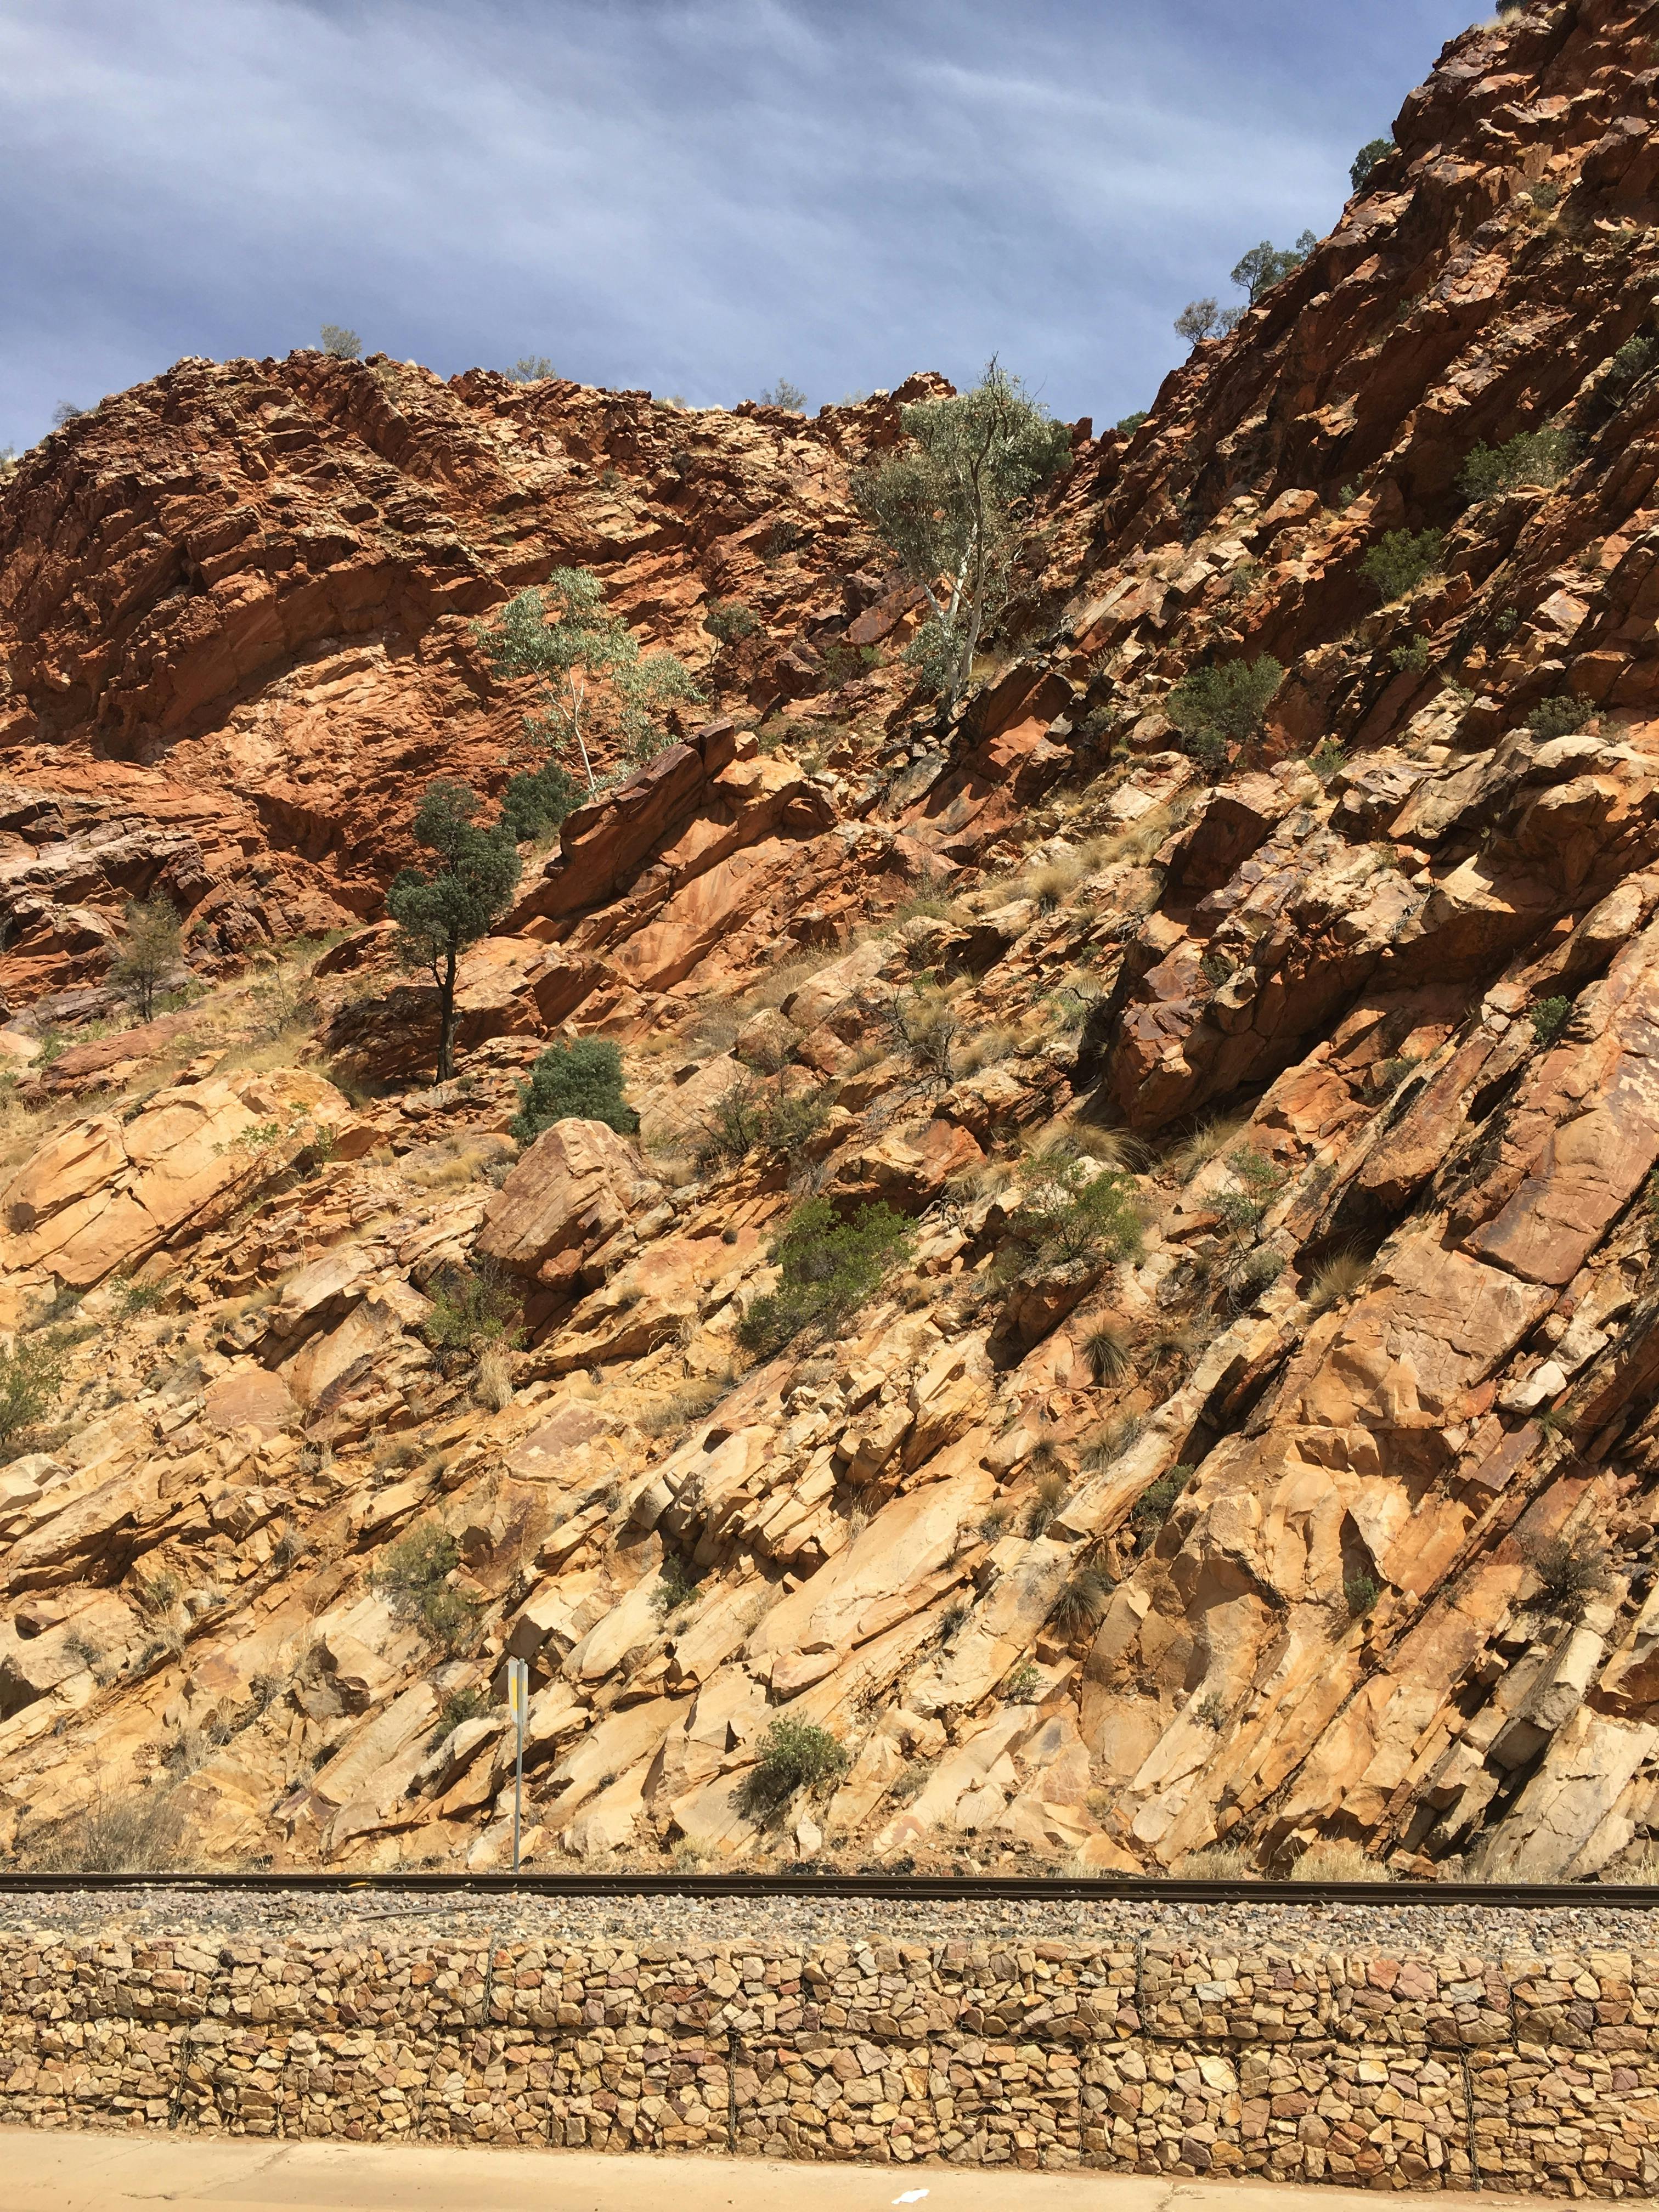 MacDonnell Ranges at The Gap (Ntaripe)